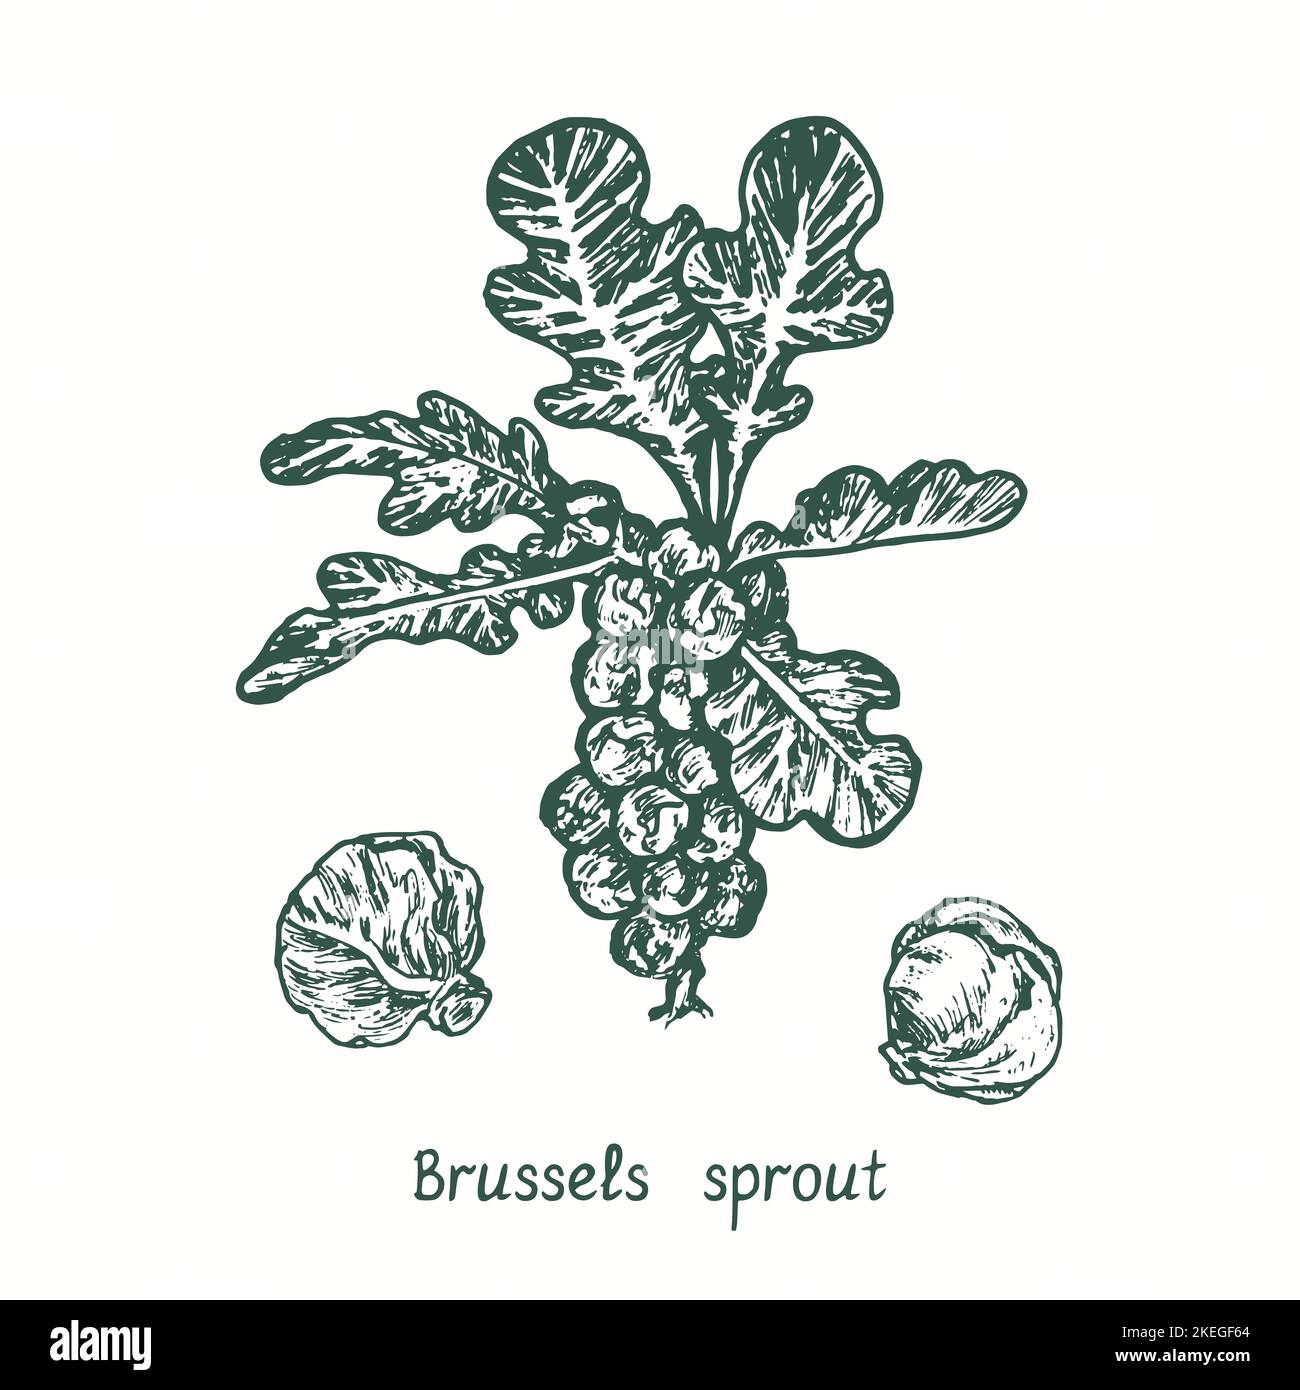 Brussels sprout plant and buds.  Ink black and white doodle drawing in woodcut style Stock Photo